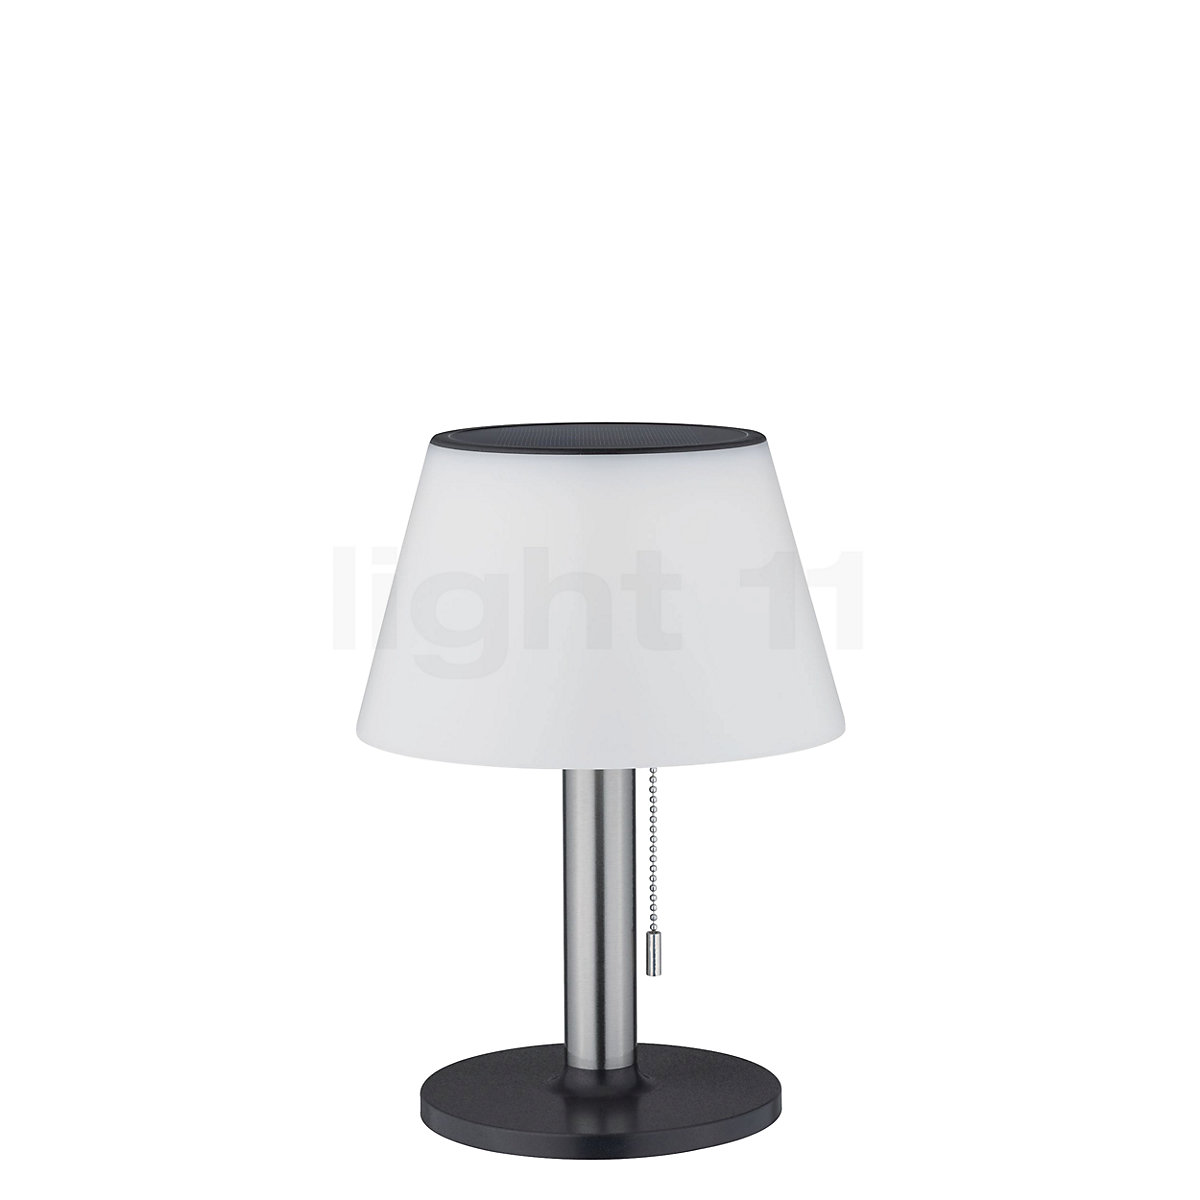 Buy Lillesol Table Lamp LED with Solar at